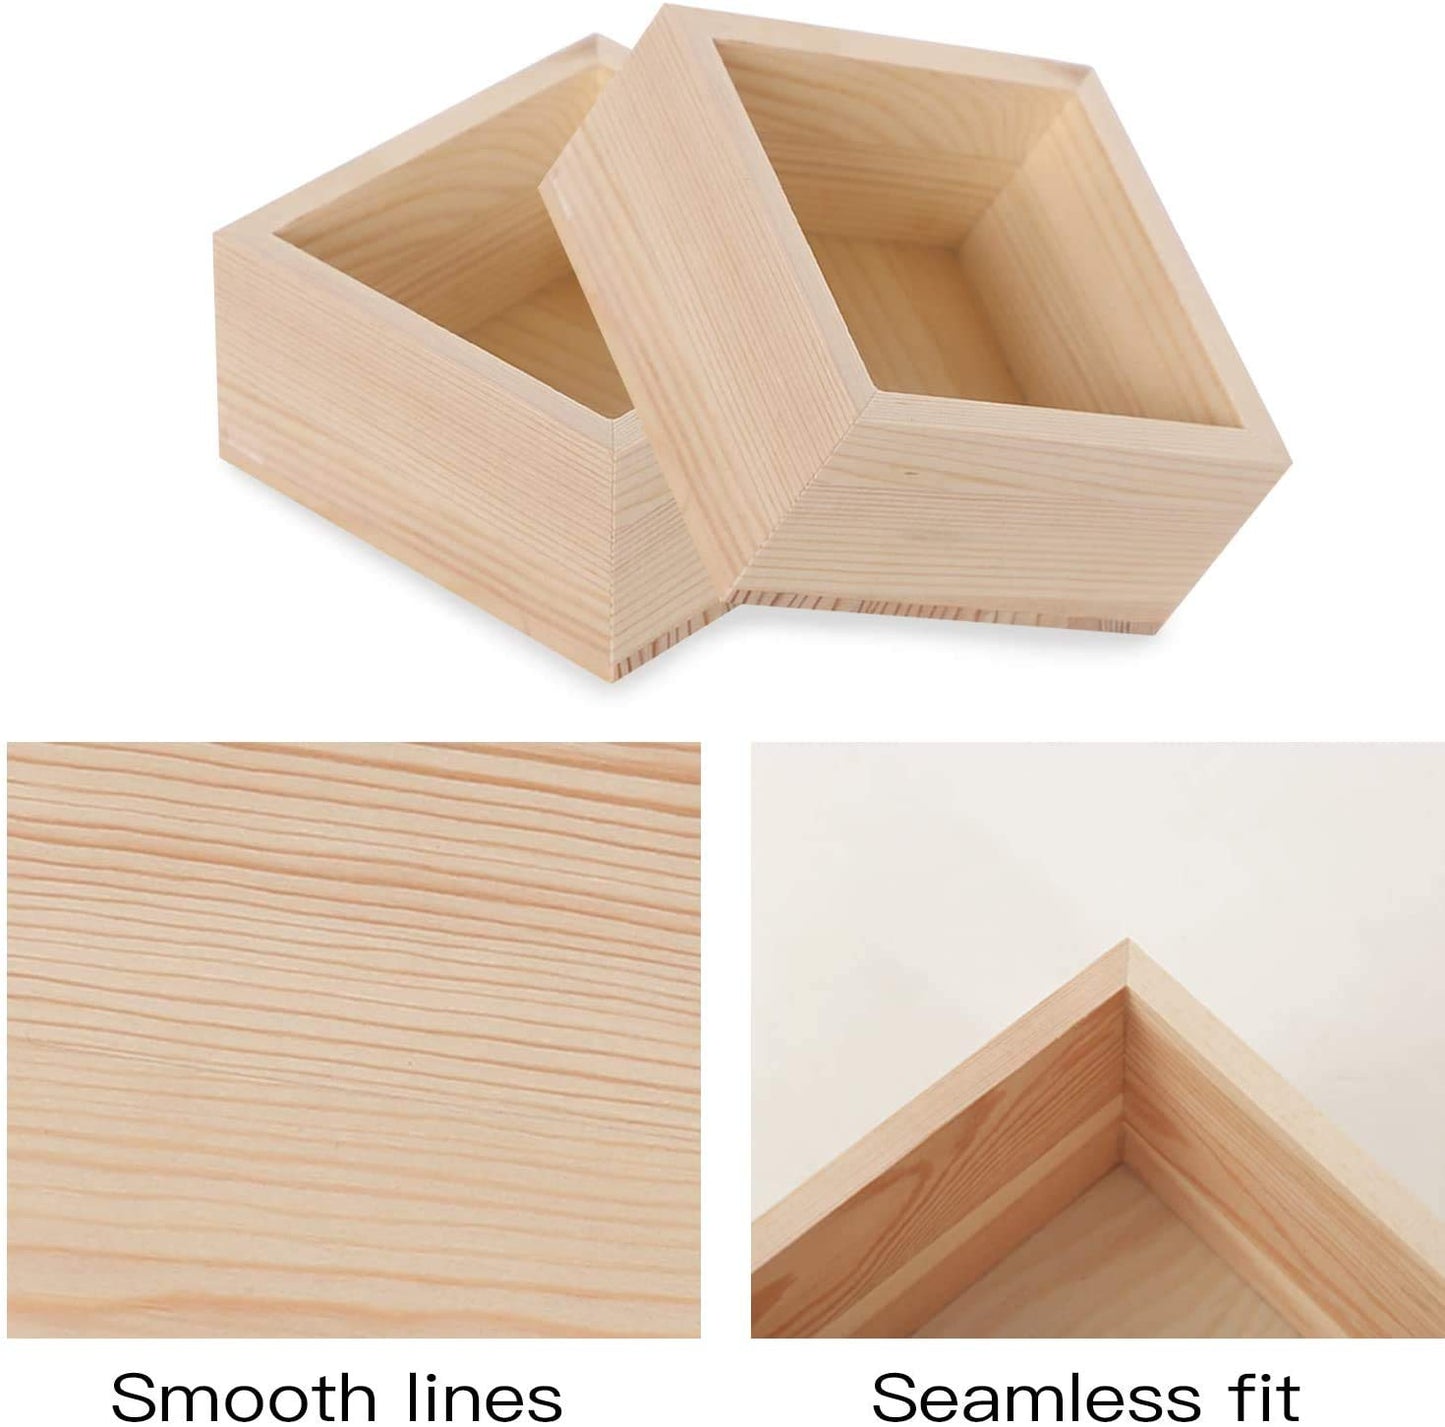 Wooden Box , Small Wood Square Storage Organizer Container Craft Box for Collectibles (4'' x 4'')